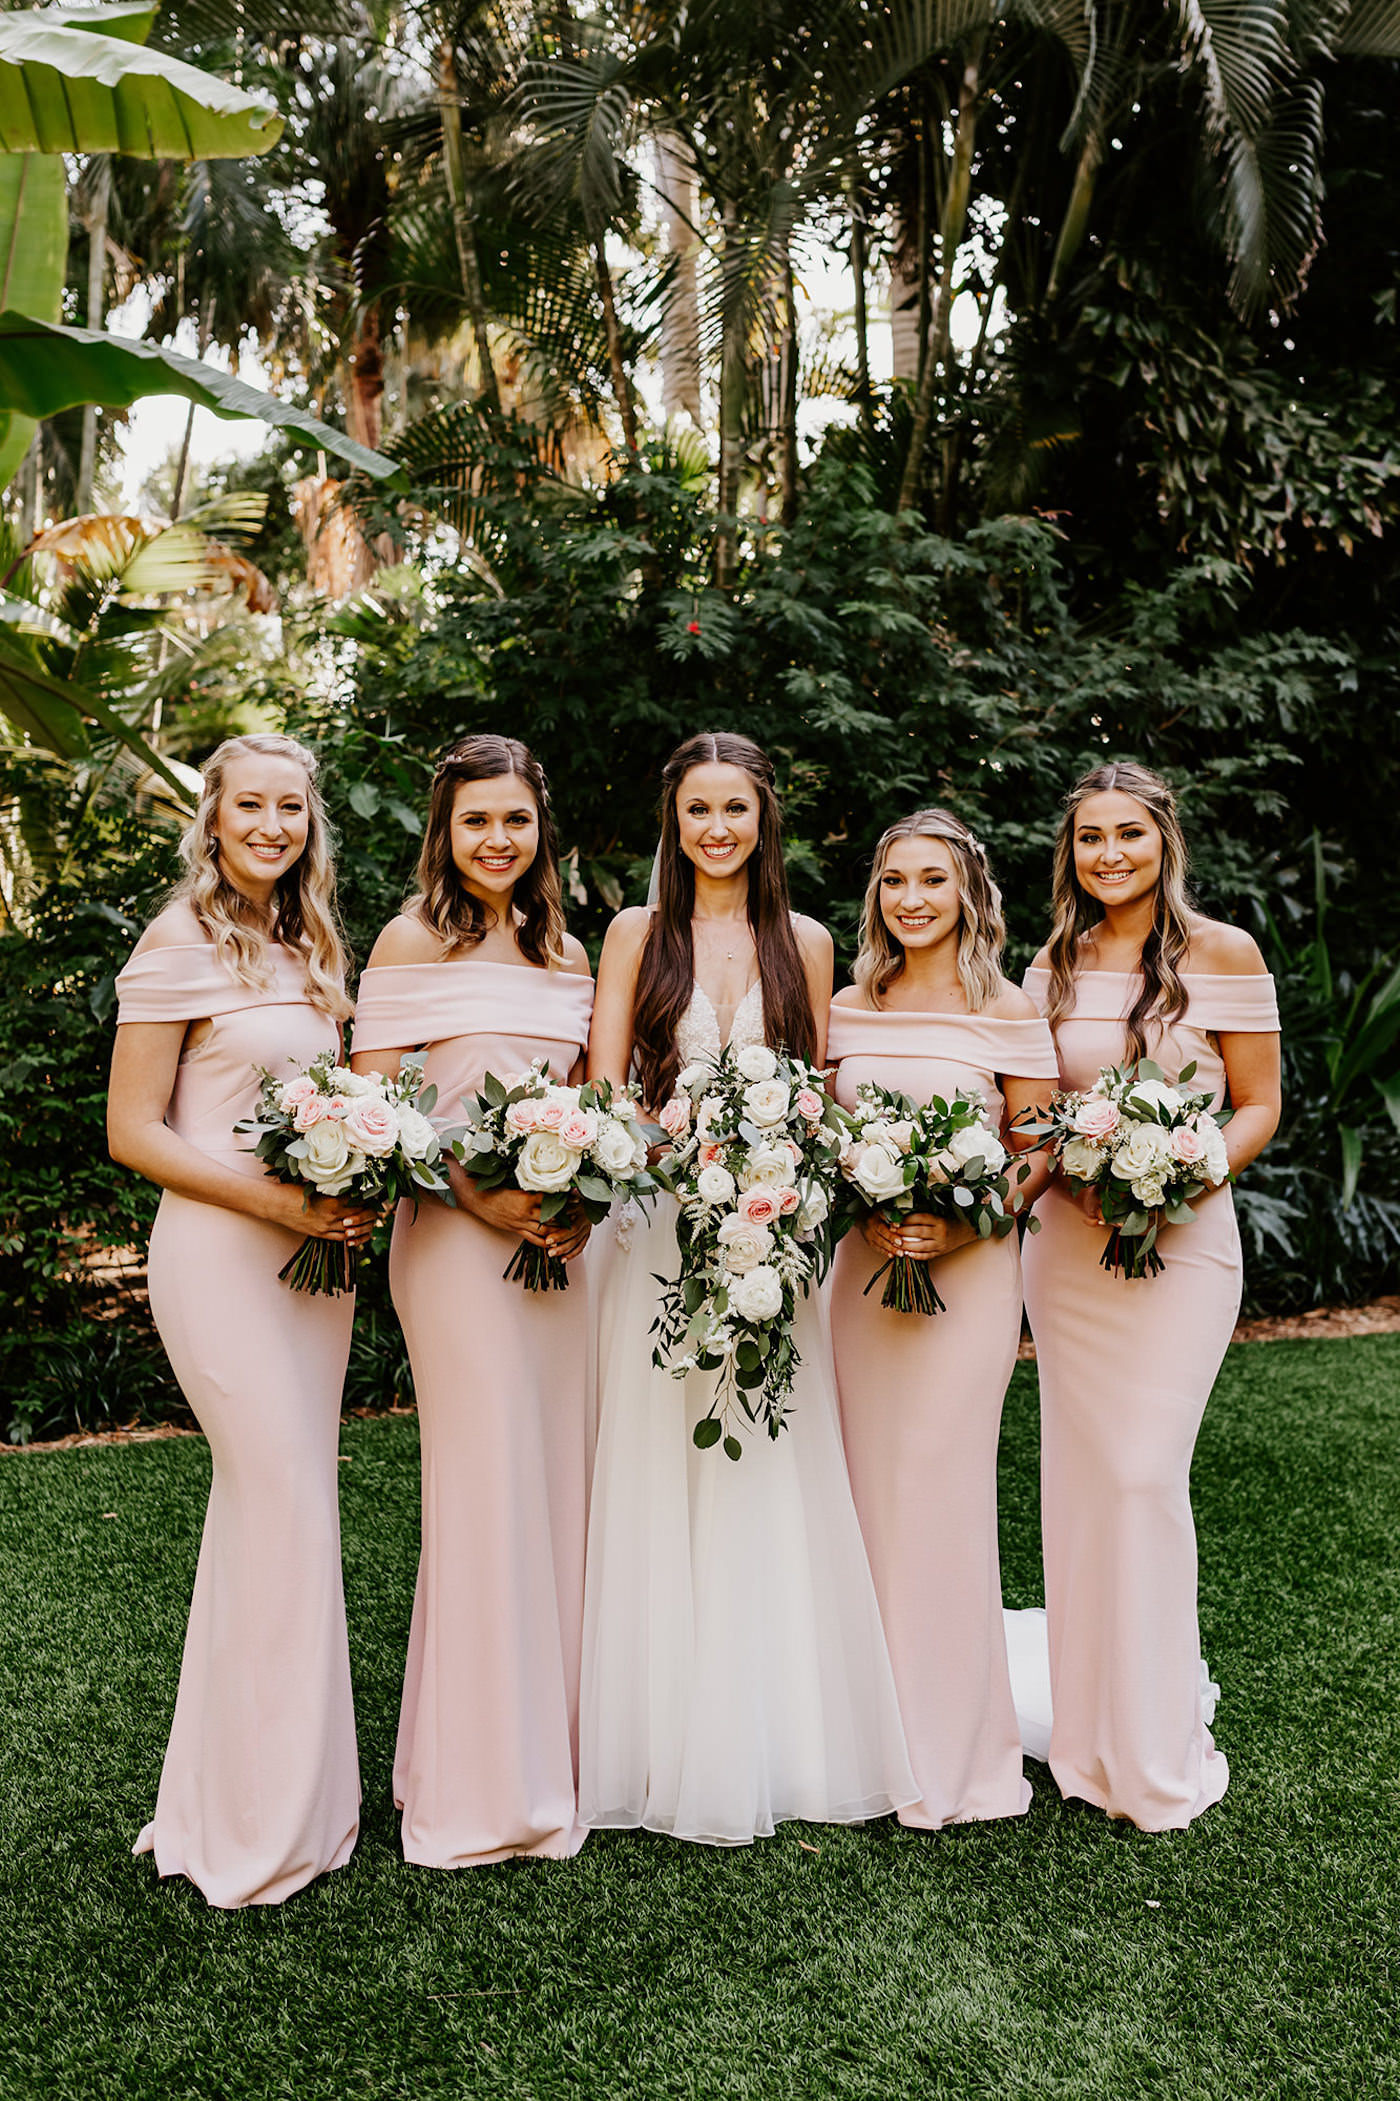 Blush Pink Off The Shoulder Long Elegant Bridesmaid Dresses by After Six | Bride and Bridesmaids Outdoor Portrait | White and Blush Pink Rose and Greenery Bouquets by St. Pete Wedding Florist Monarch Events and Design